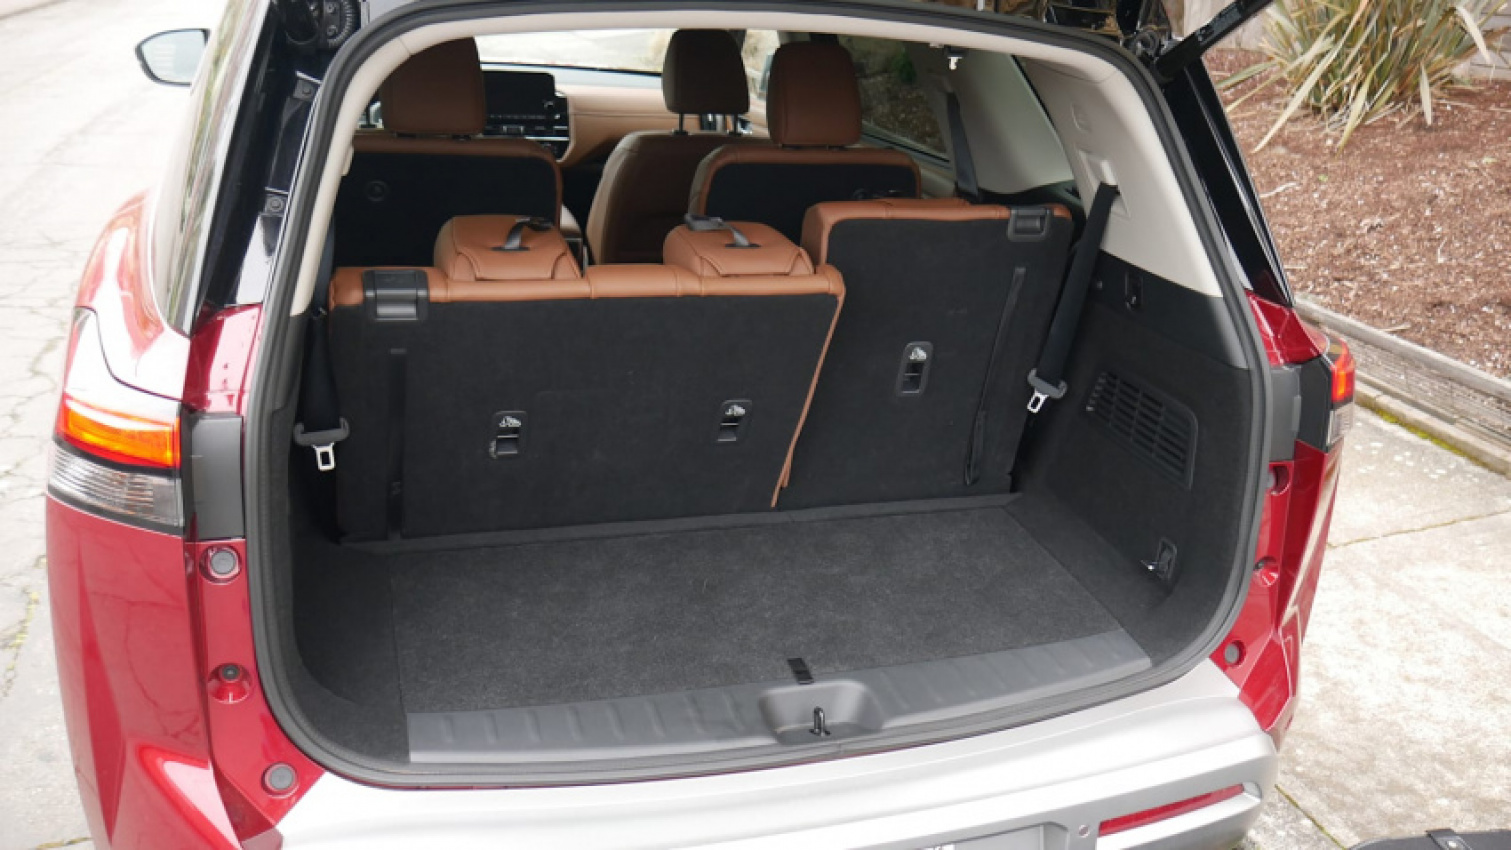 autos, cars, nissan, crossover, driveway tests, luggage test, nissan pathfinder luggage test | how much cargo space behind 3rd row?